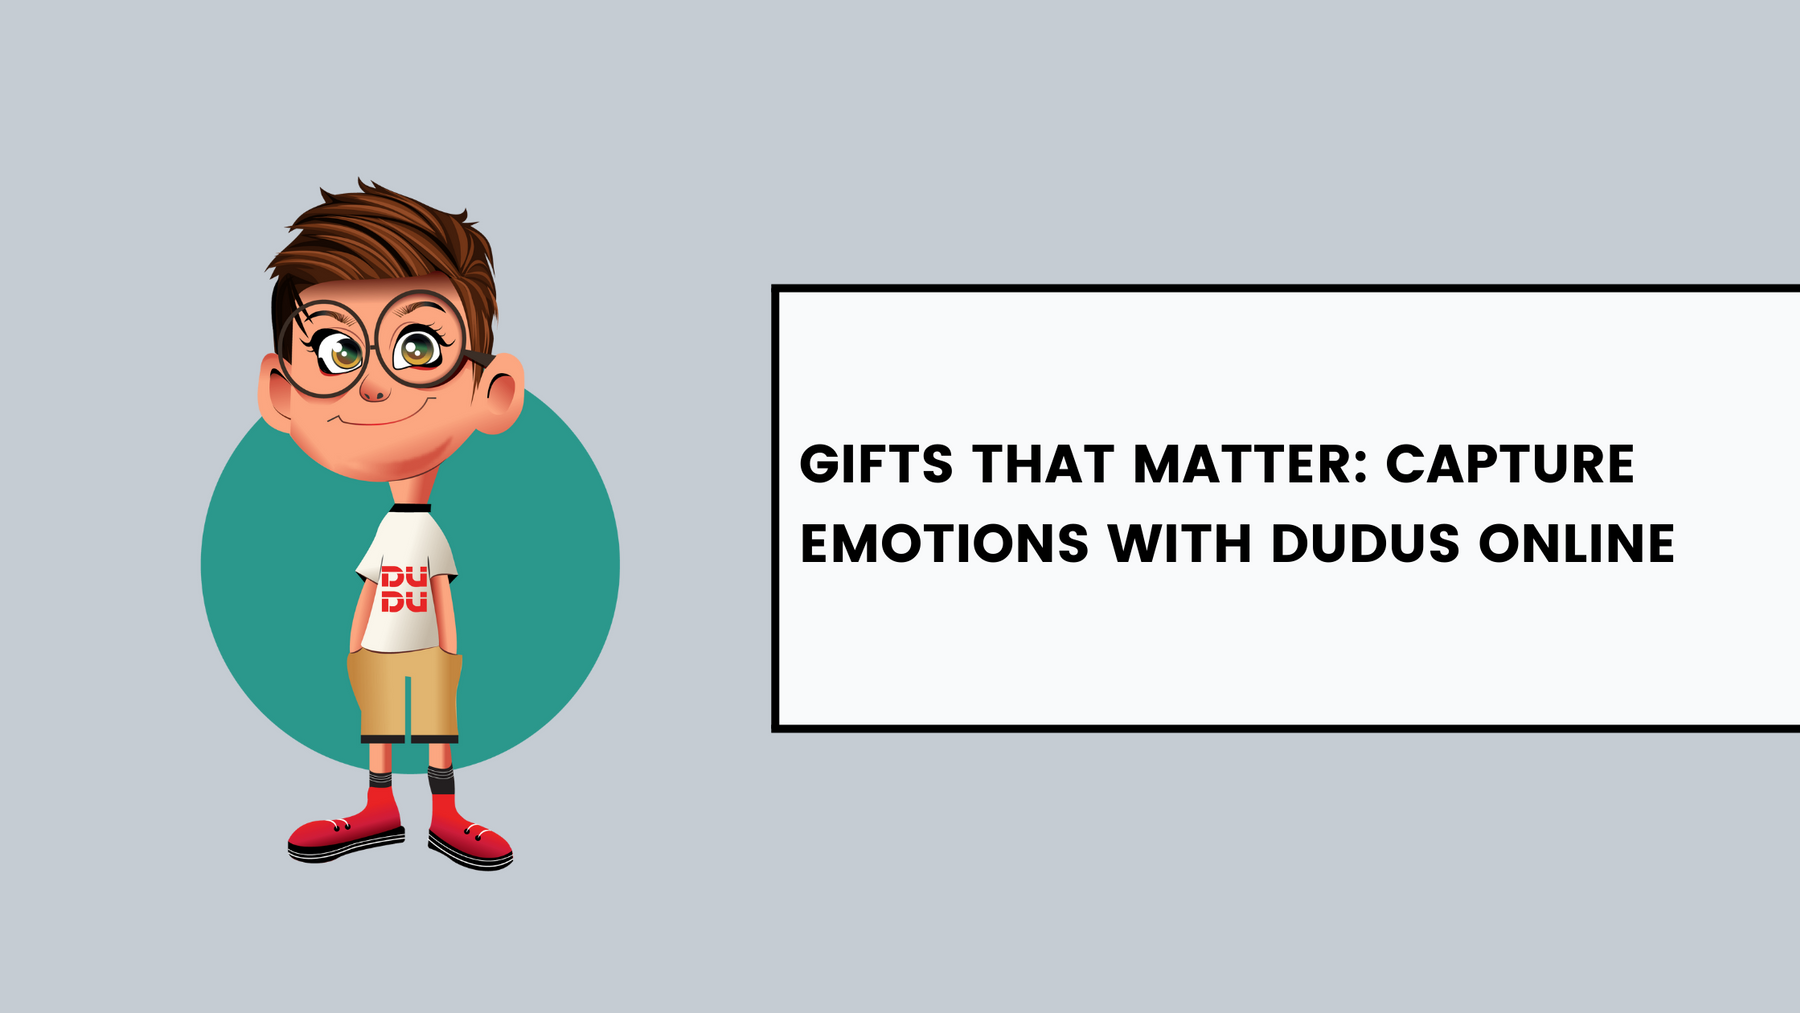 Gifts That Matter: Capture Emotions With Dudus Online